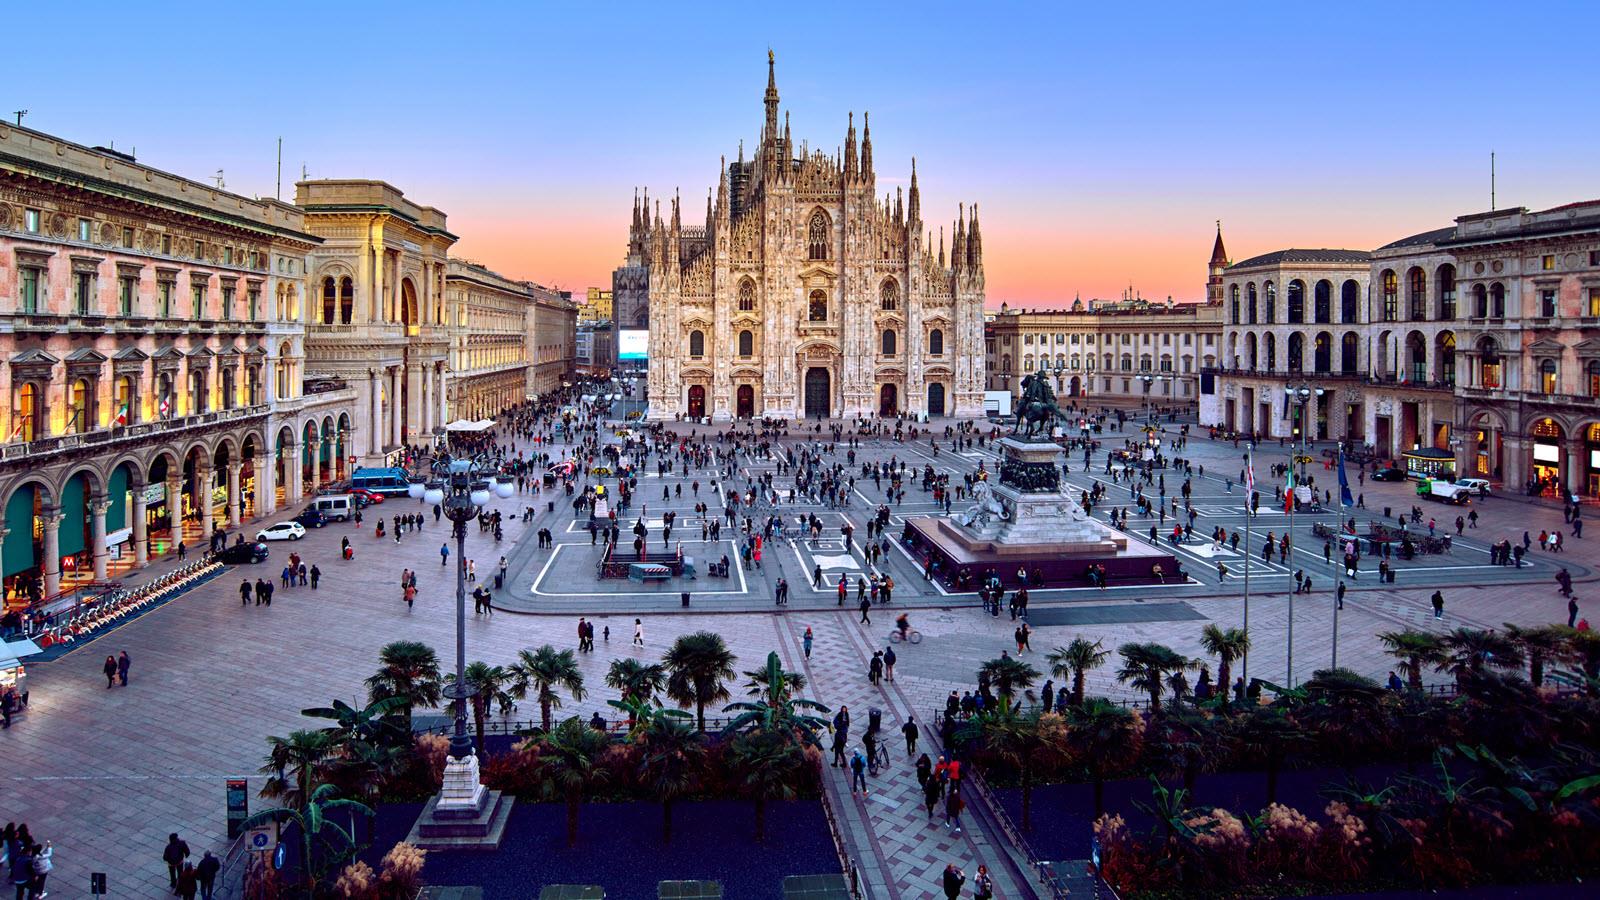 Cathedral and piazza in Milan, Italy